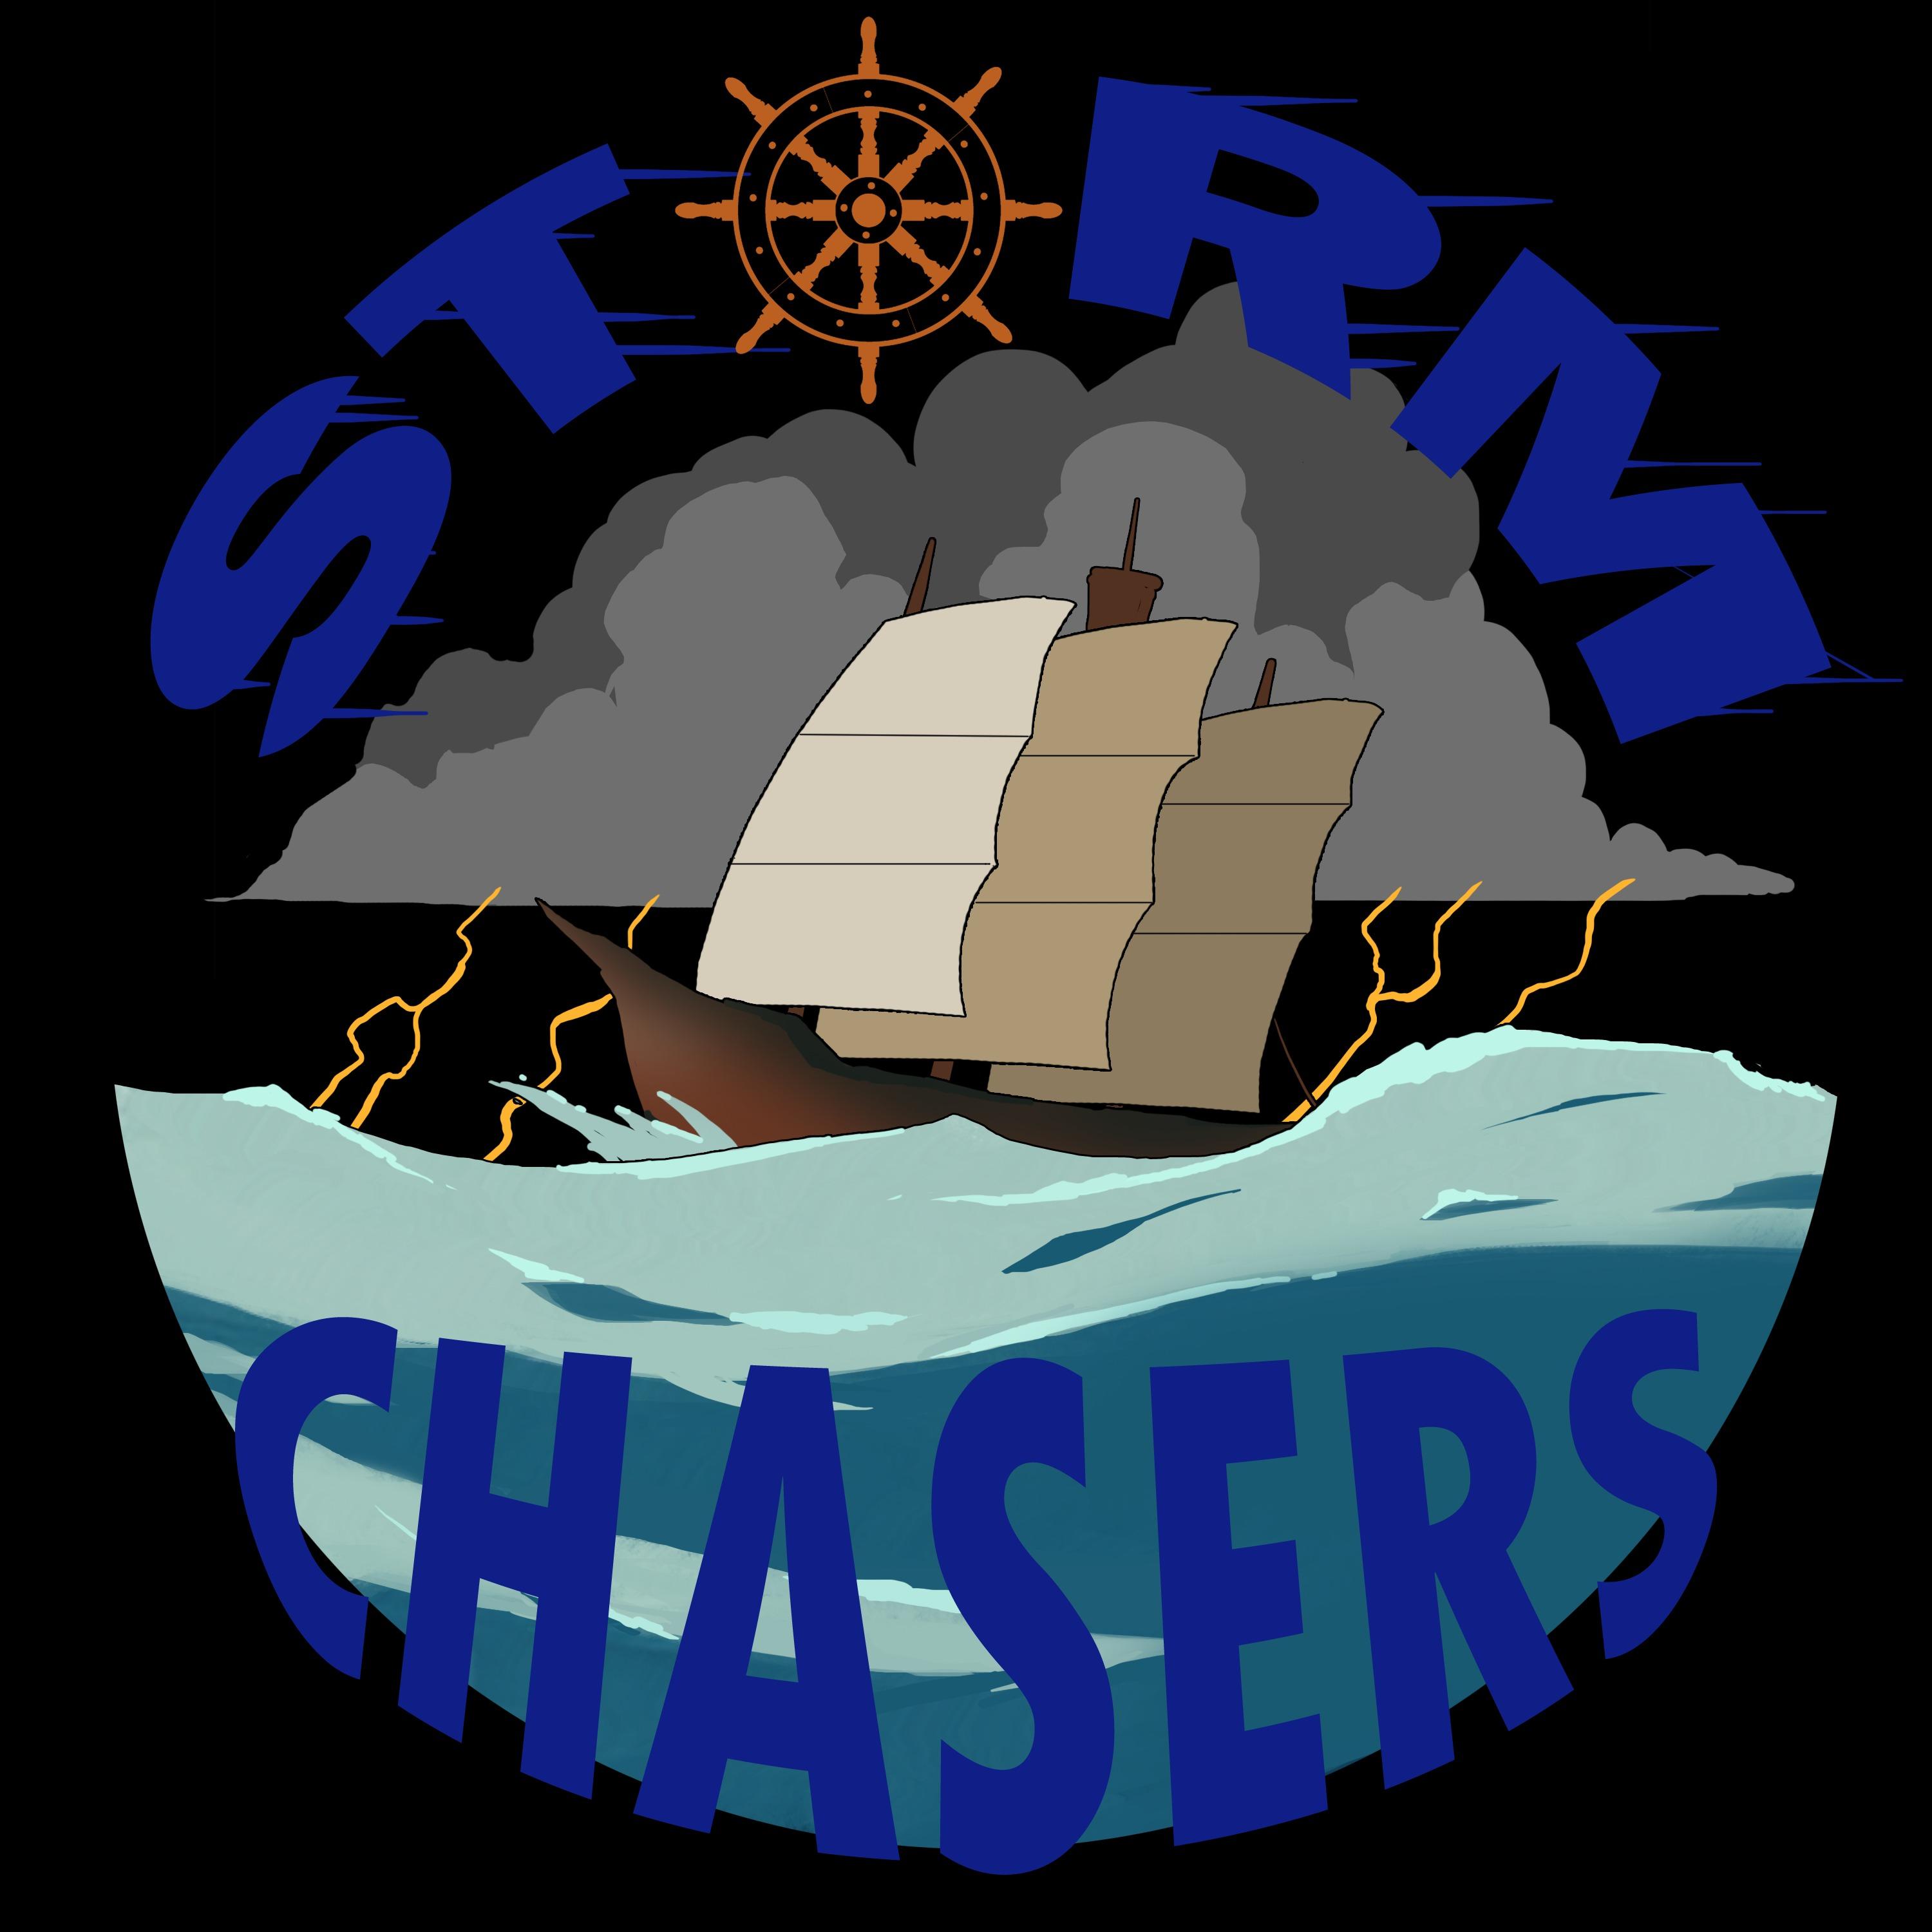 The Storm Chasers